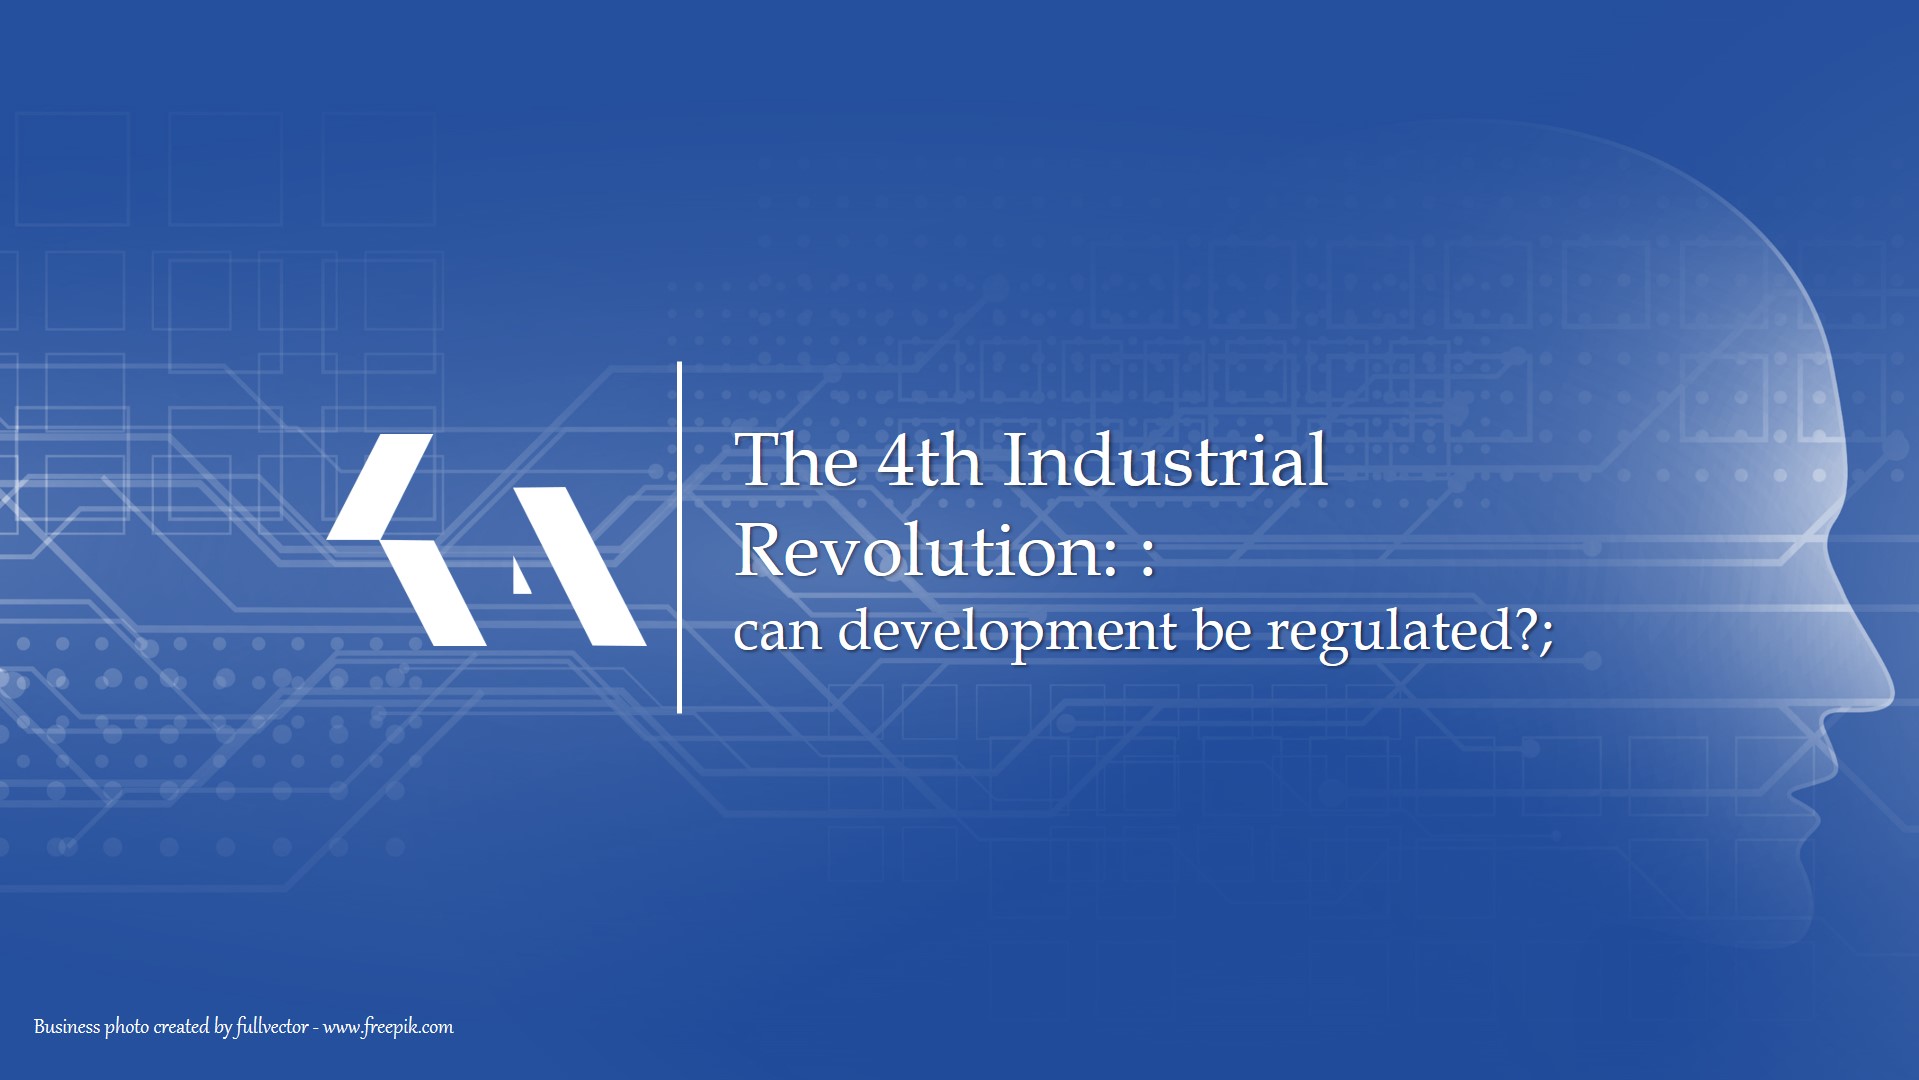 The 4th Industrial Revolution: can development be regulated?